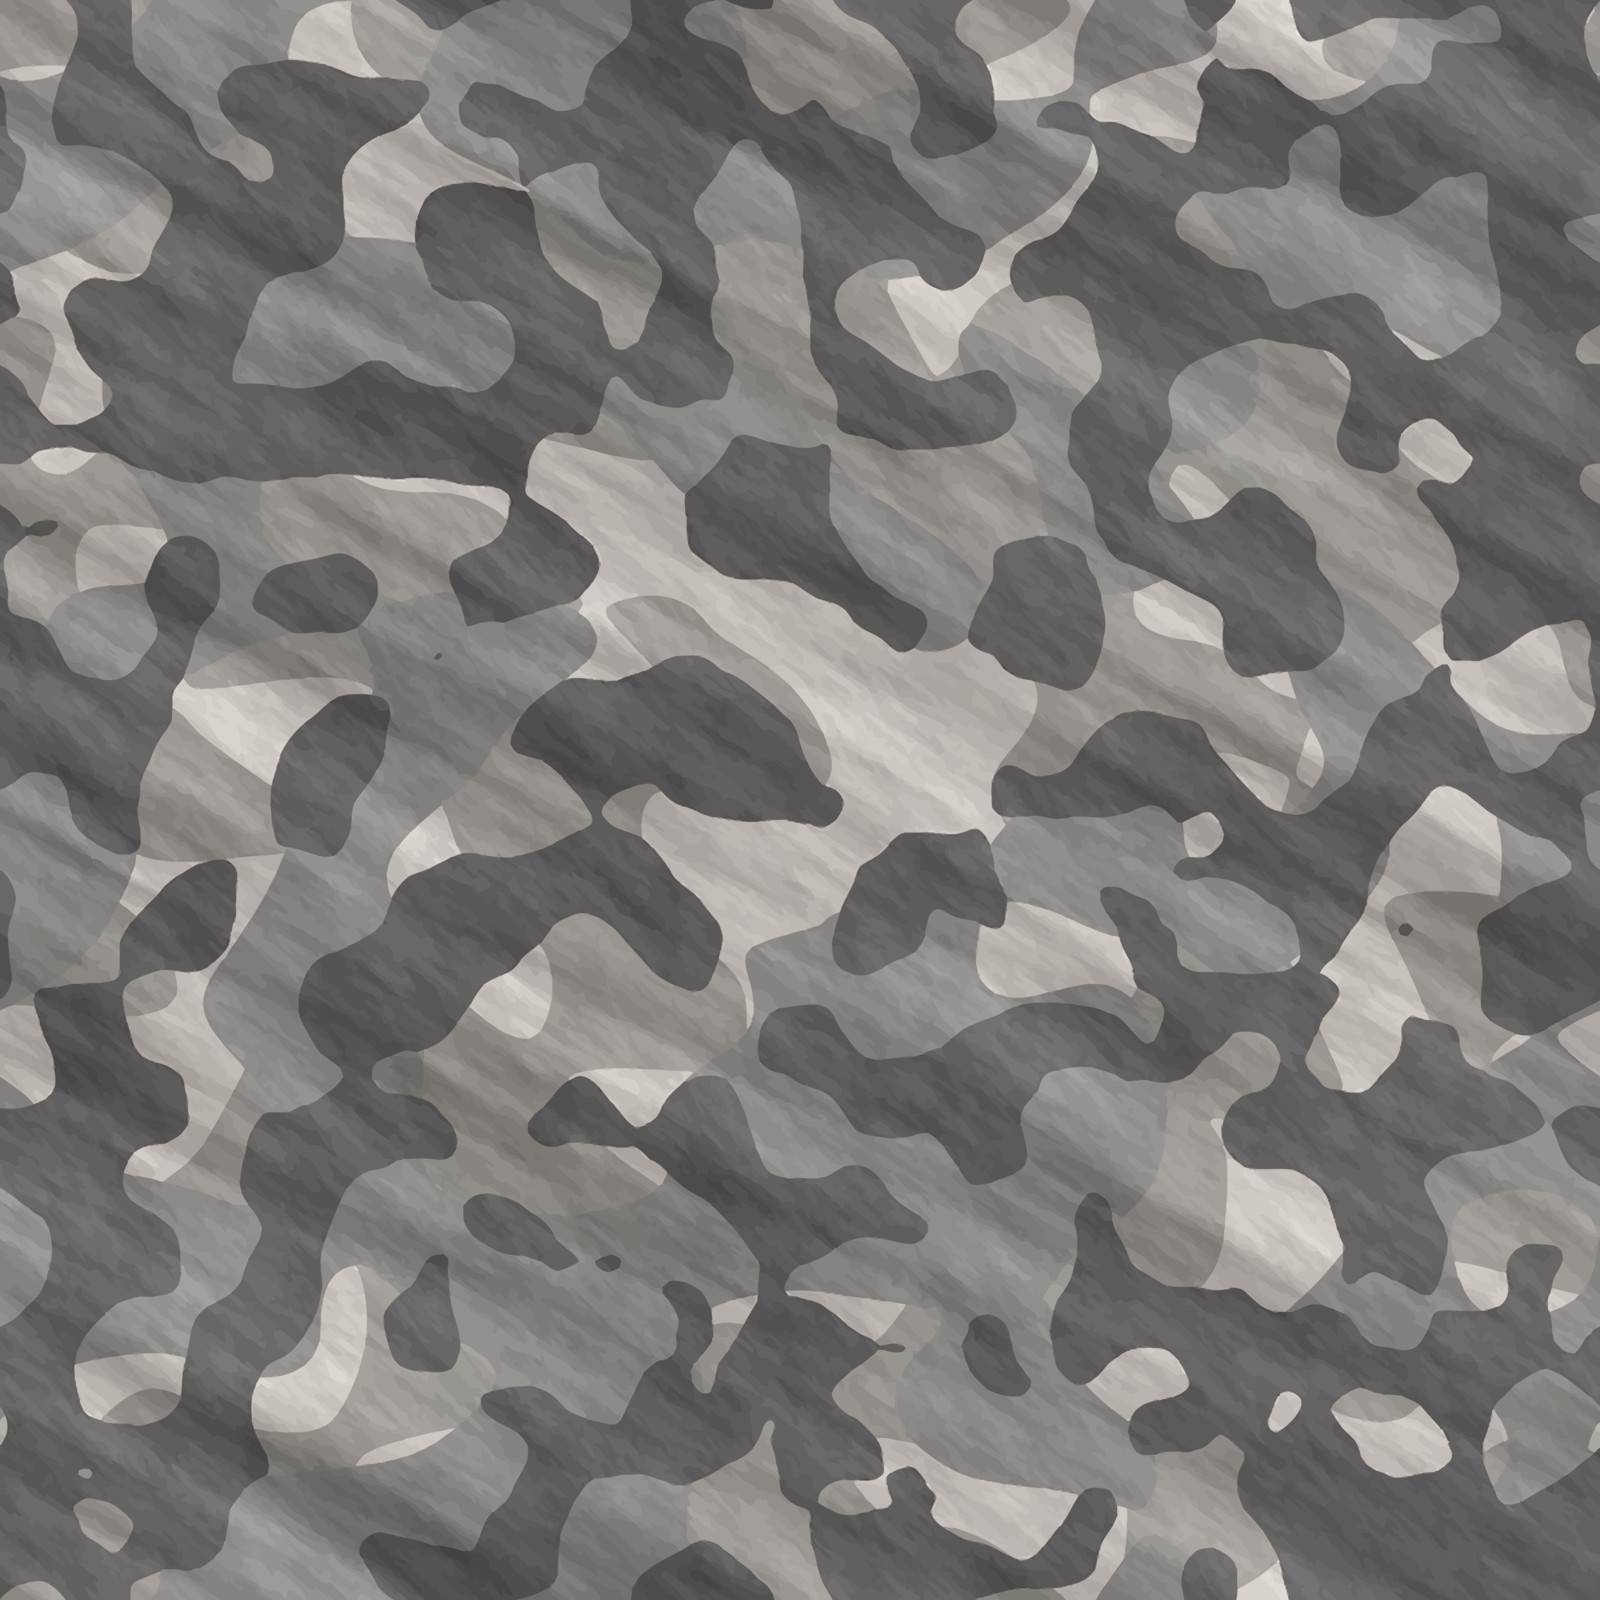 excellent image of camouflage pattern cloth or fabric